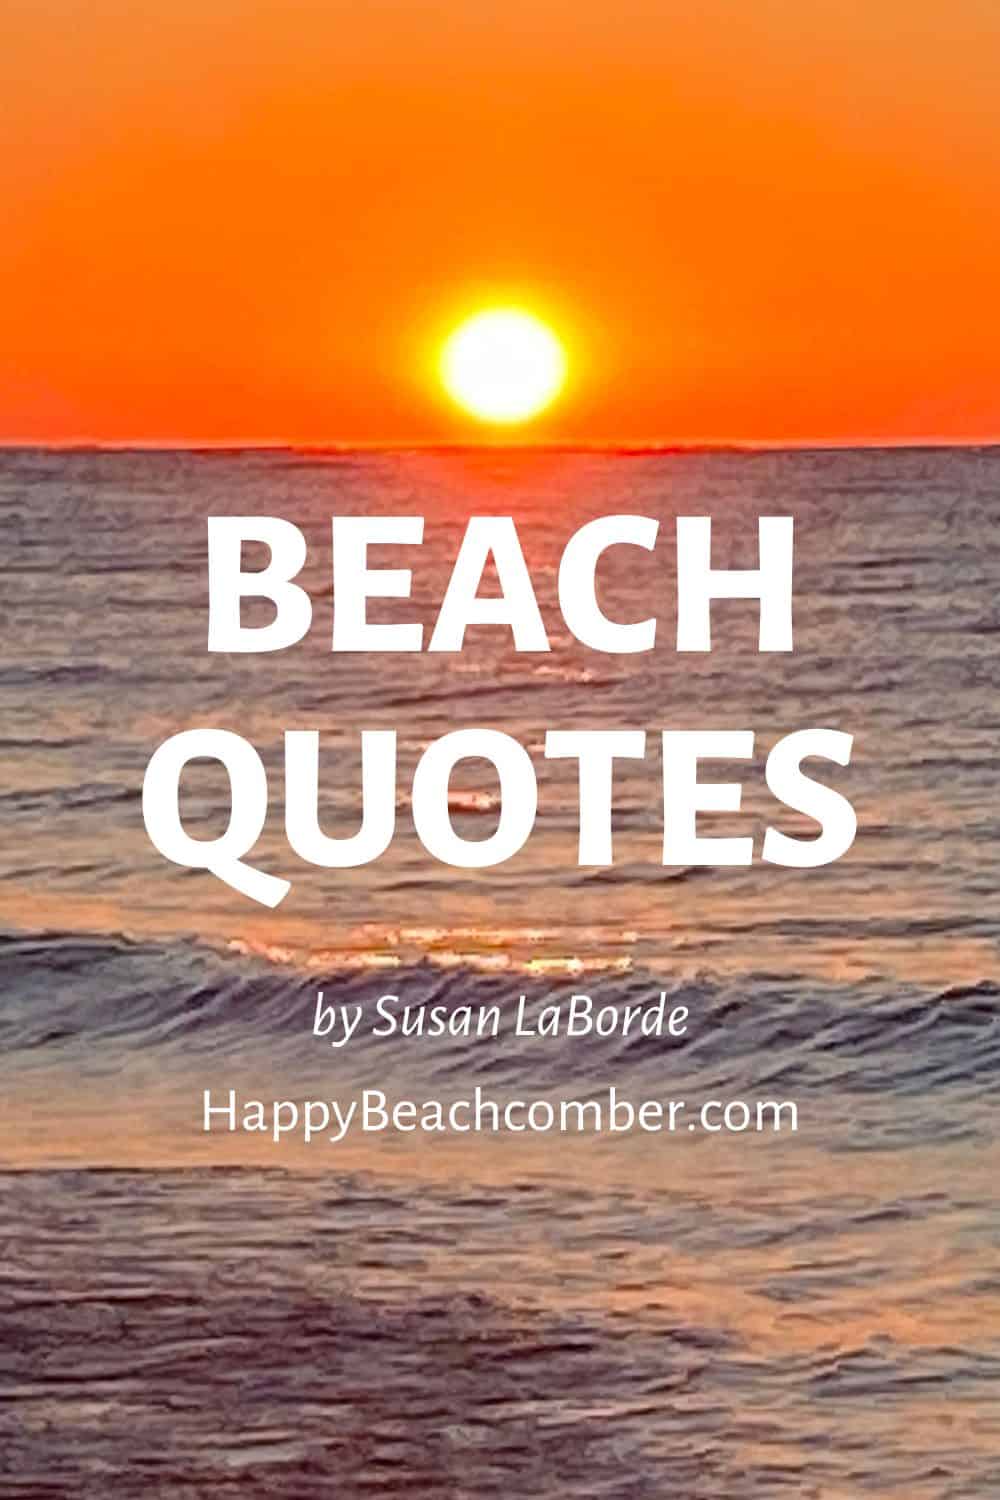 Beach Quotes by Susan LaBorde